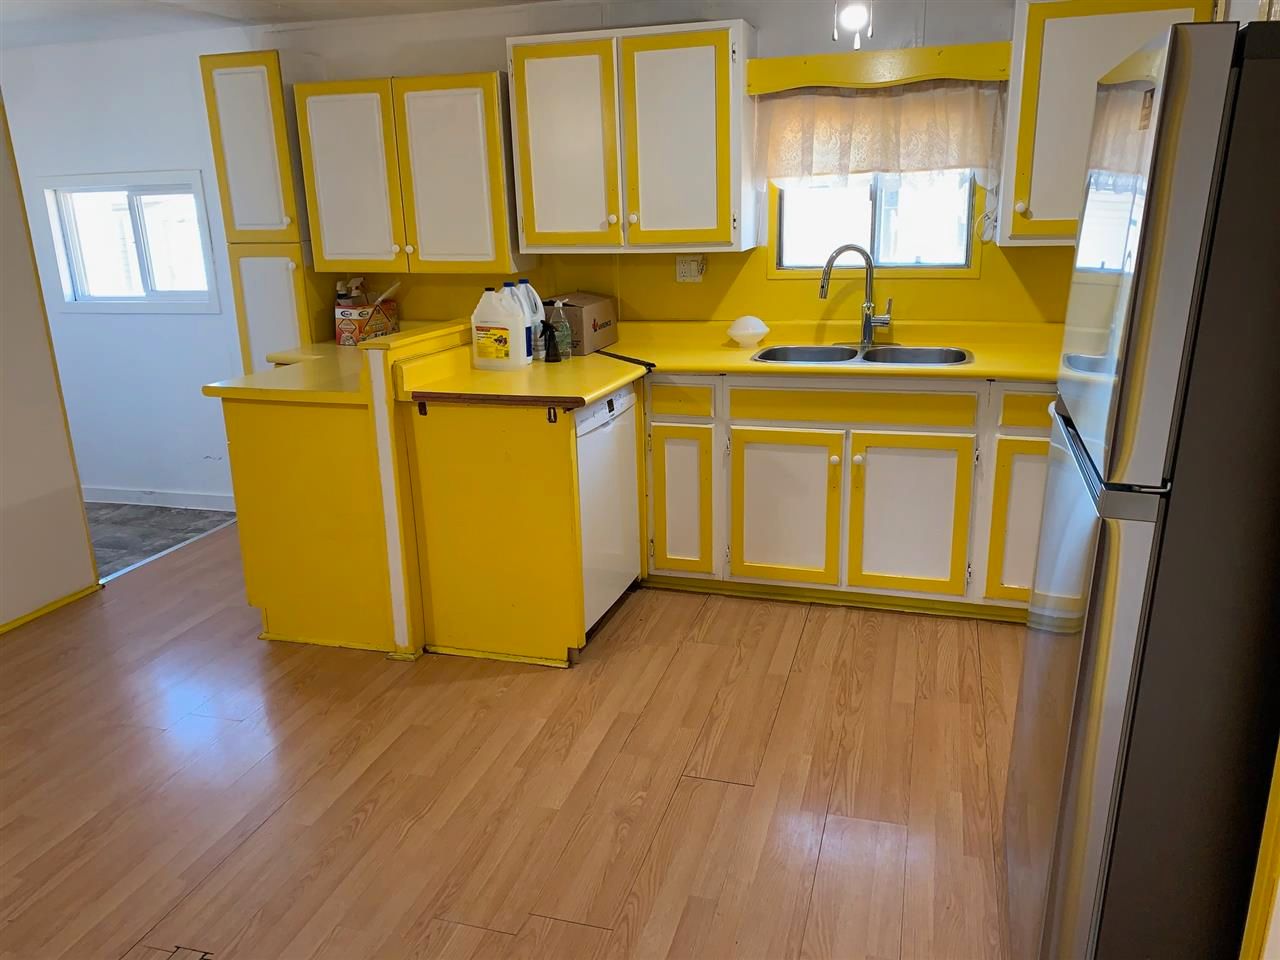 Photo 19: Photos: 10356 99 Street: Taylor Manufactured Home for sale (Fort St. John (Zone 60))  : MLS®# R2542502